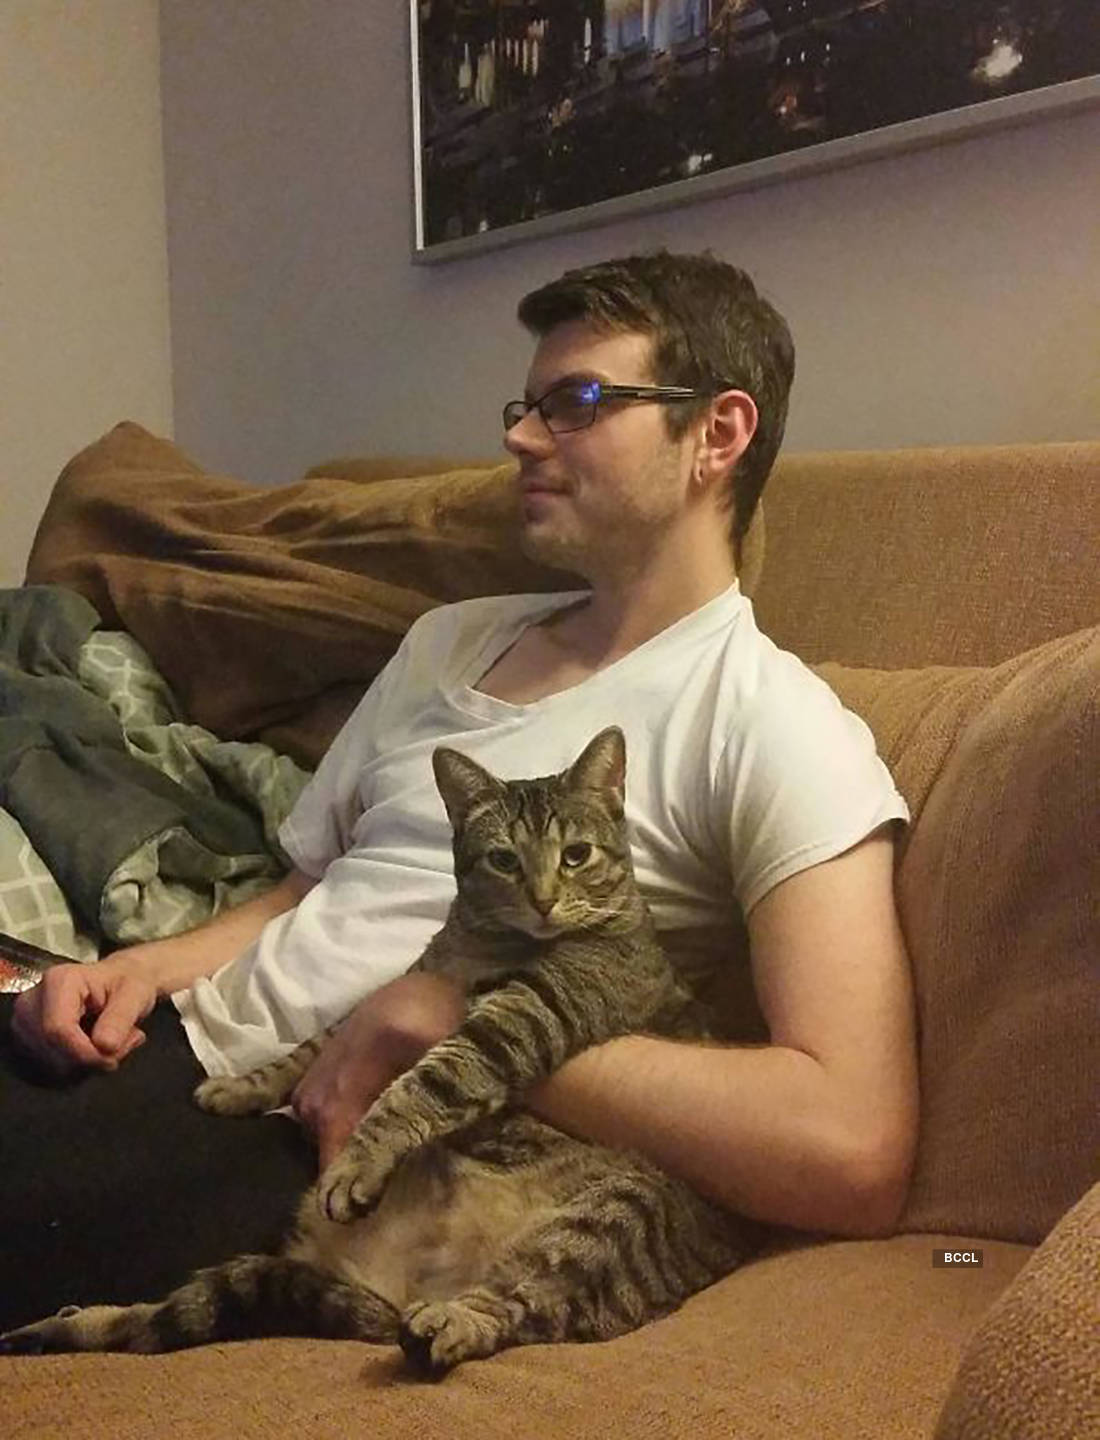 Funny pictures of adorable but cheeky pets who stole their owner’s place